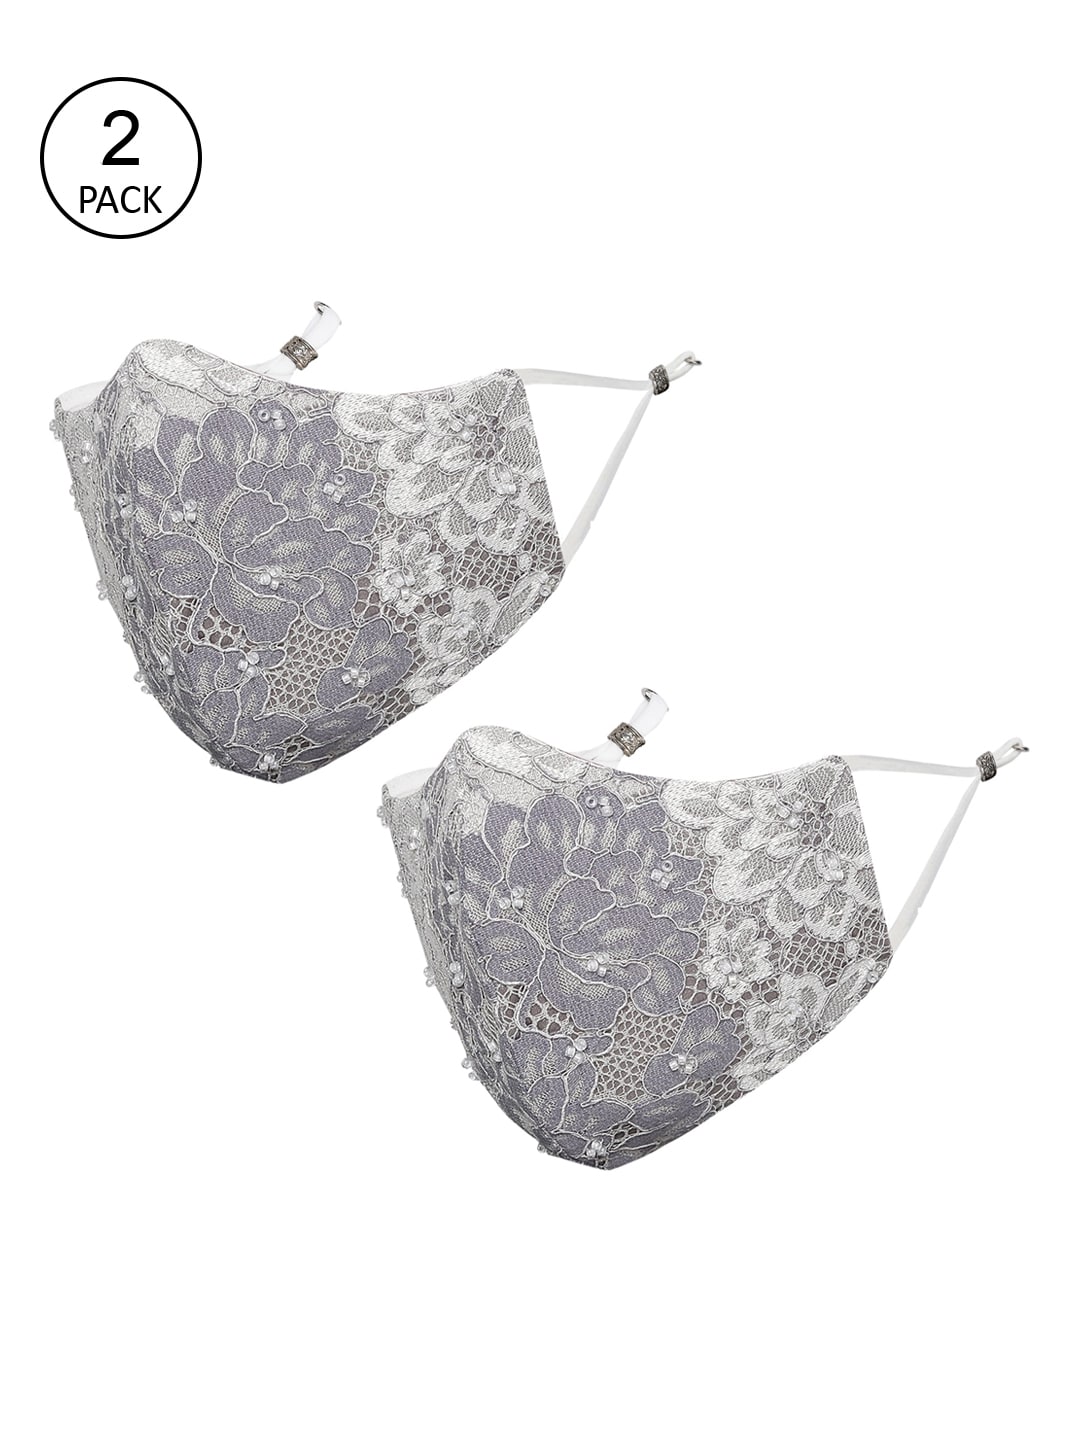 MASQ Pack of 2 Grey Lace 4-Ply Reusable Cloth Face Masks with Beaded Detail Price in India